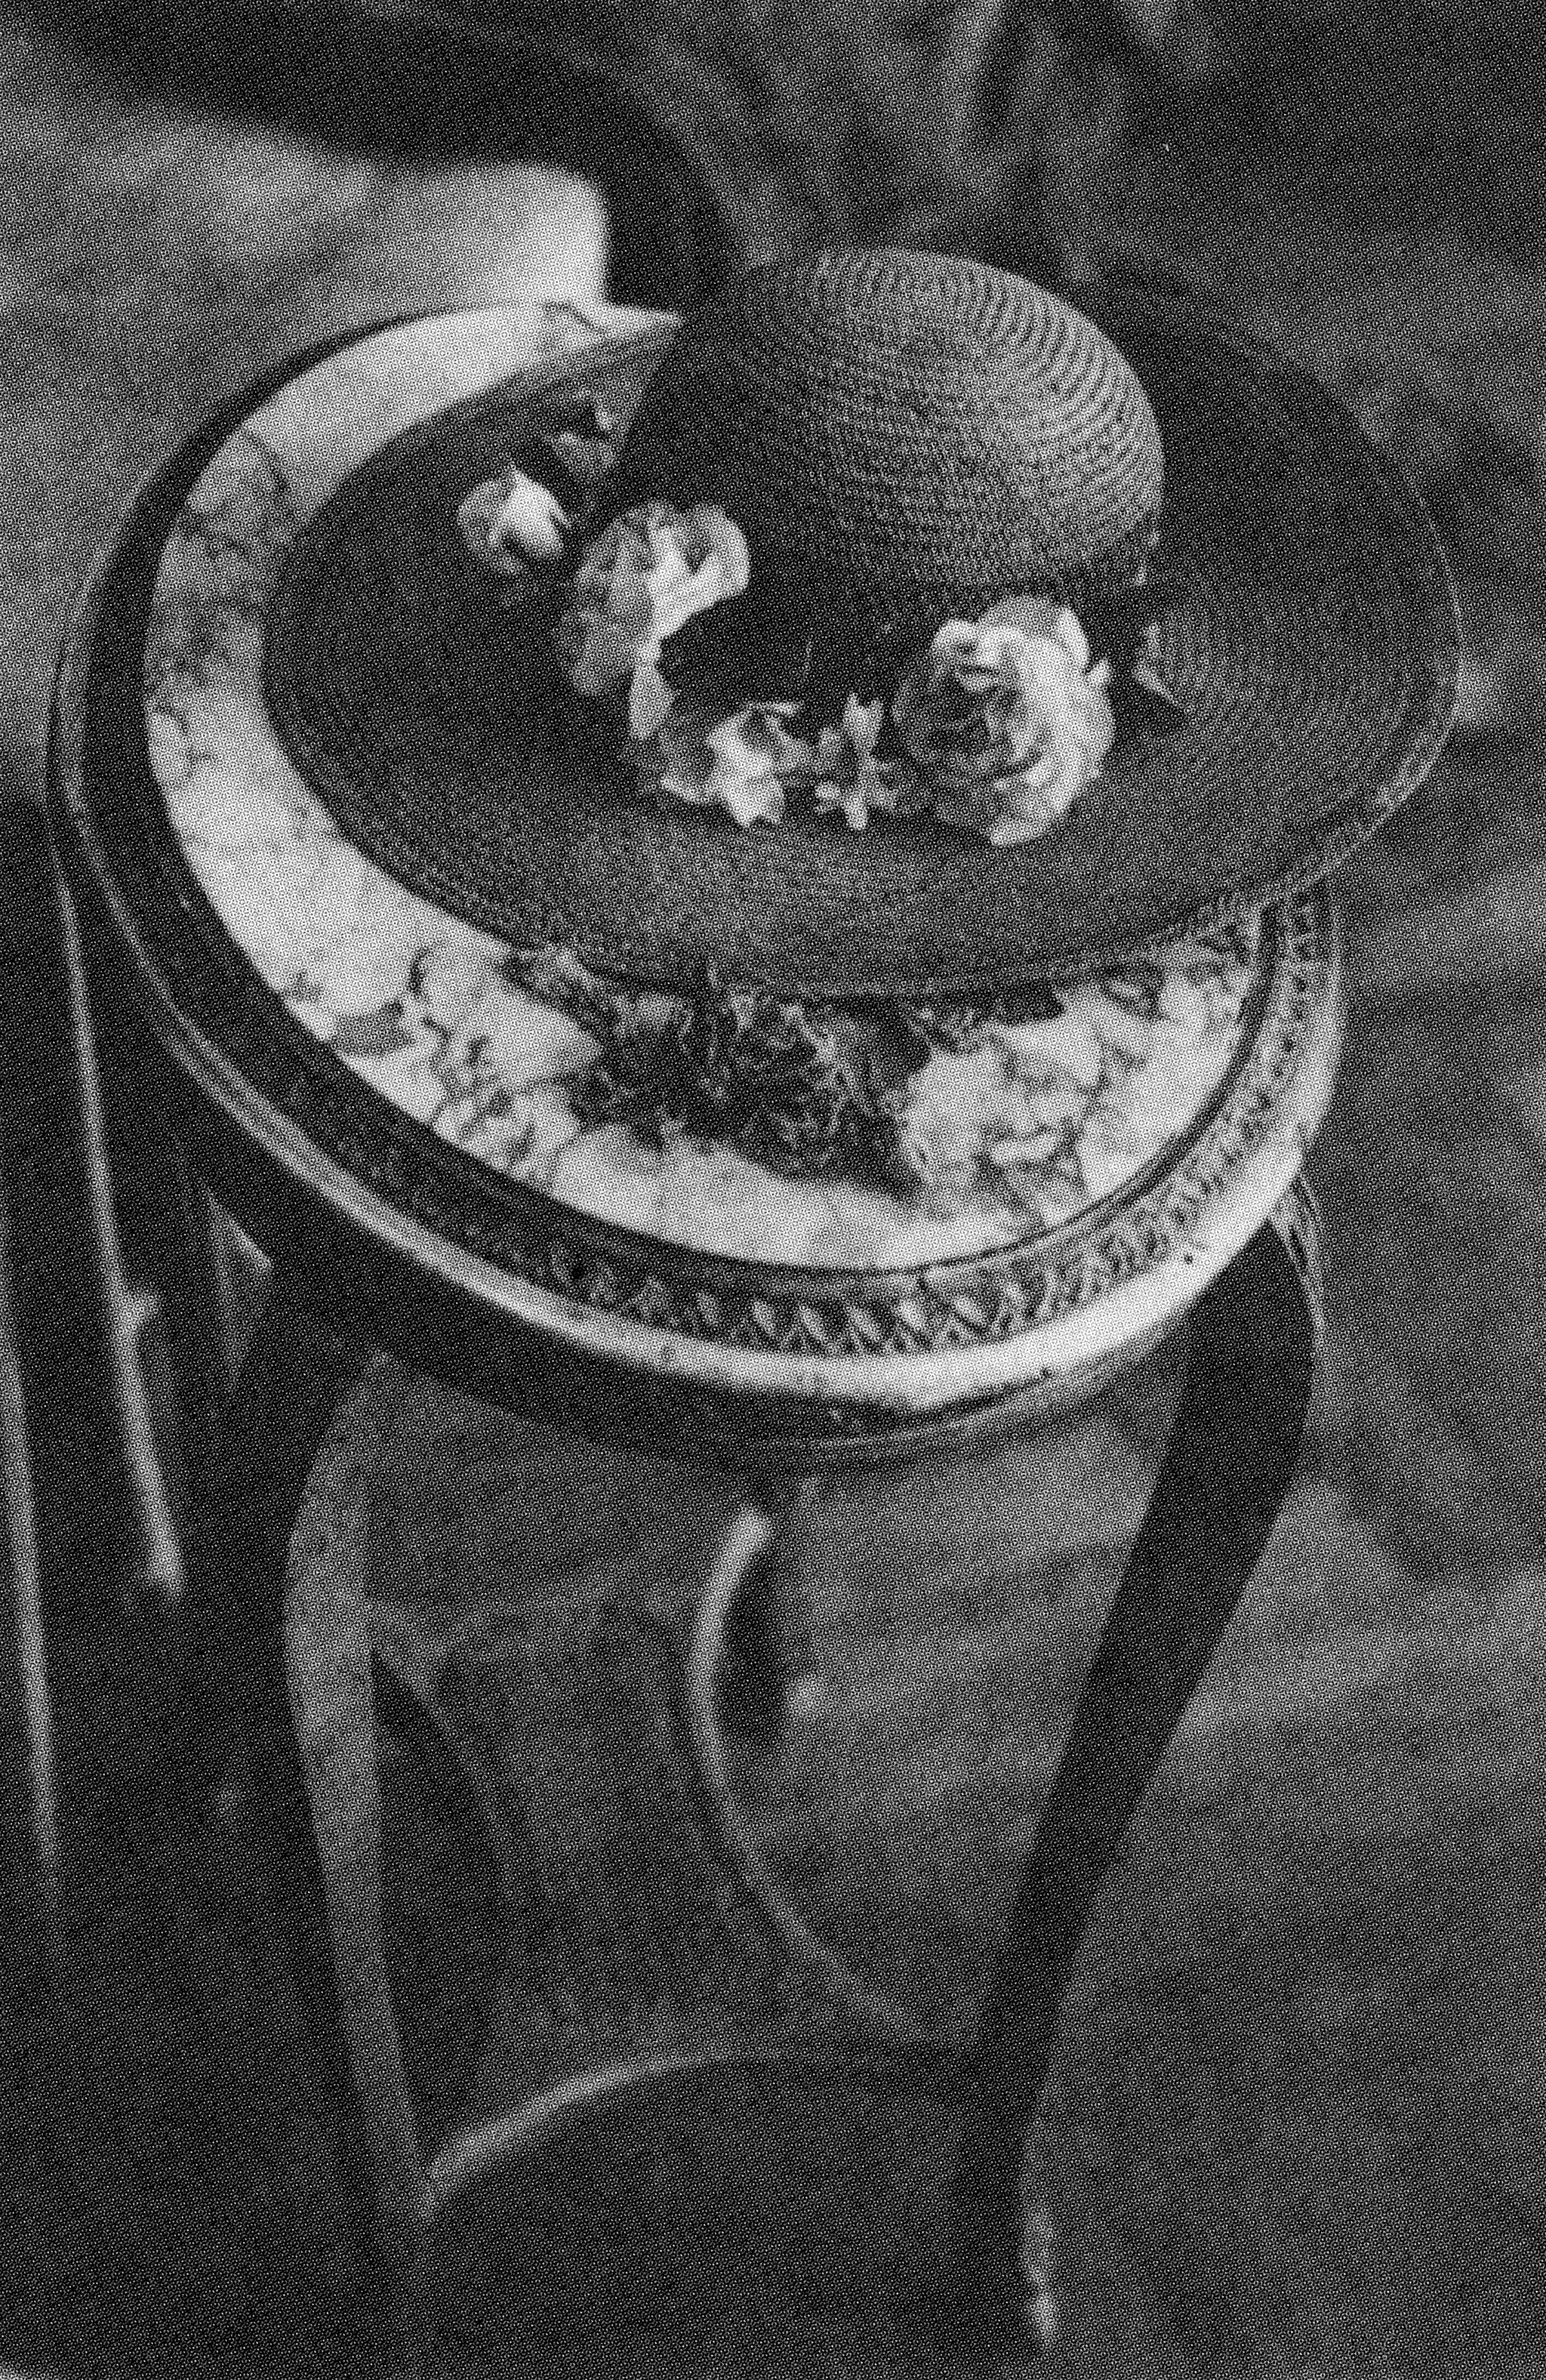 A black and white photograph of a straw hat with flowers on it set on an oval granite table.